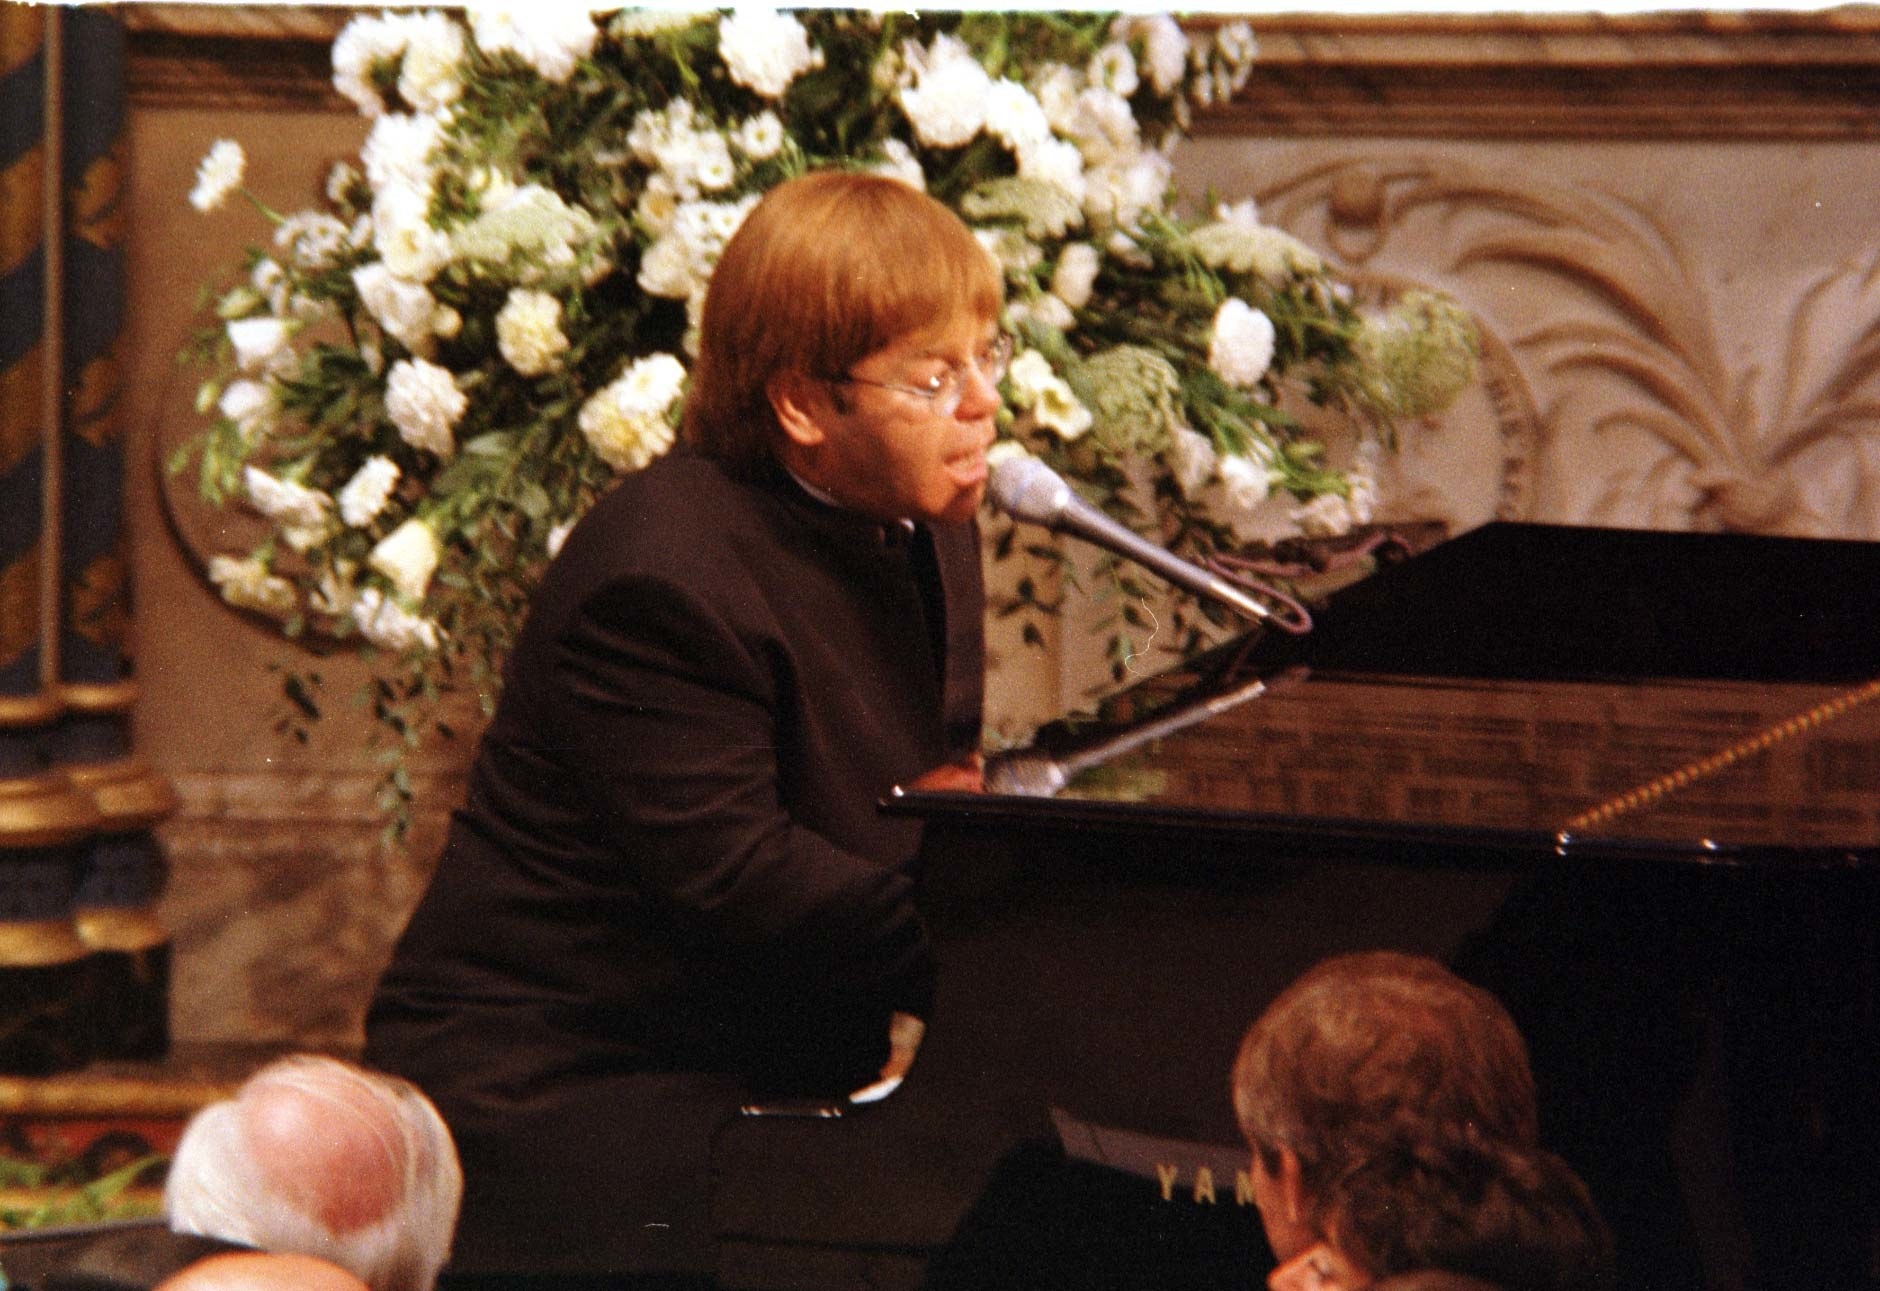 Elton John sitting at a piano and singing, wearing black, with a church altar behind him